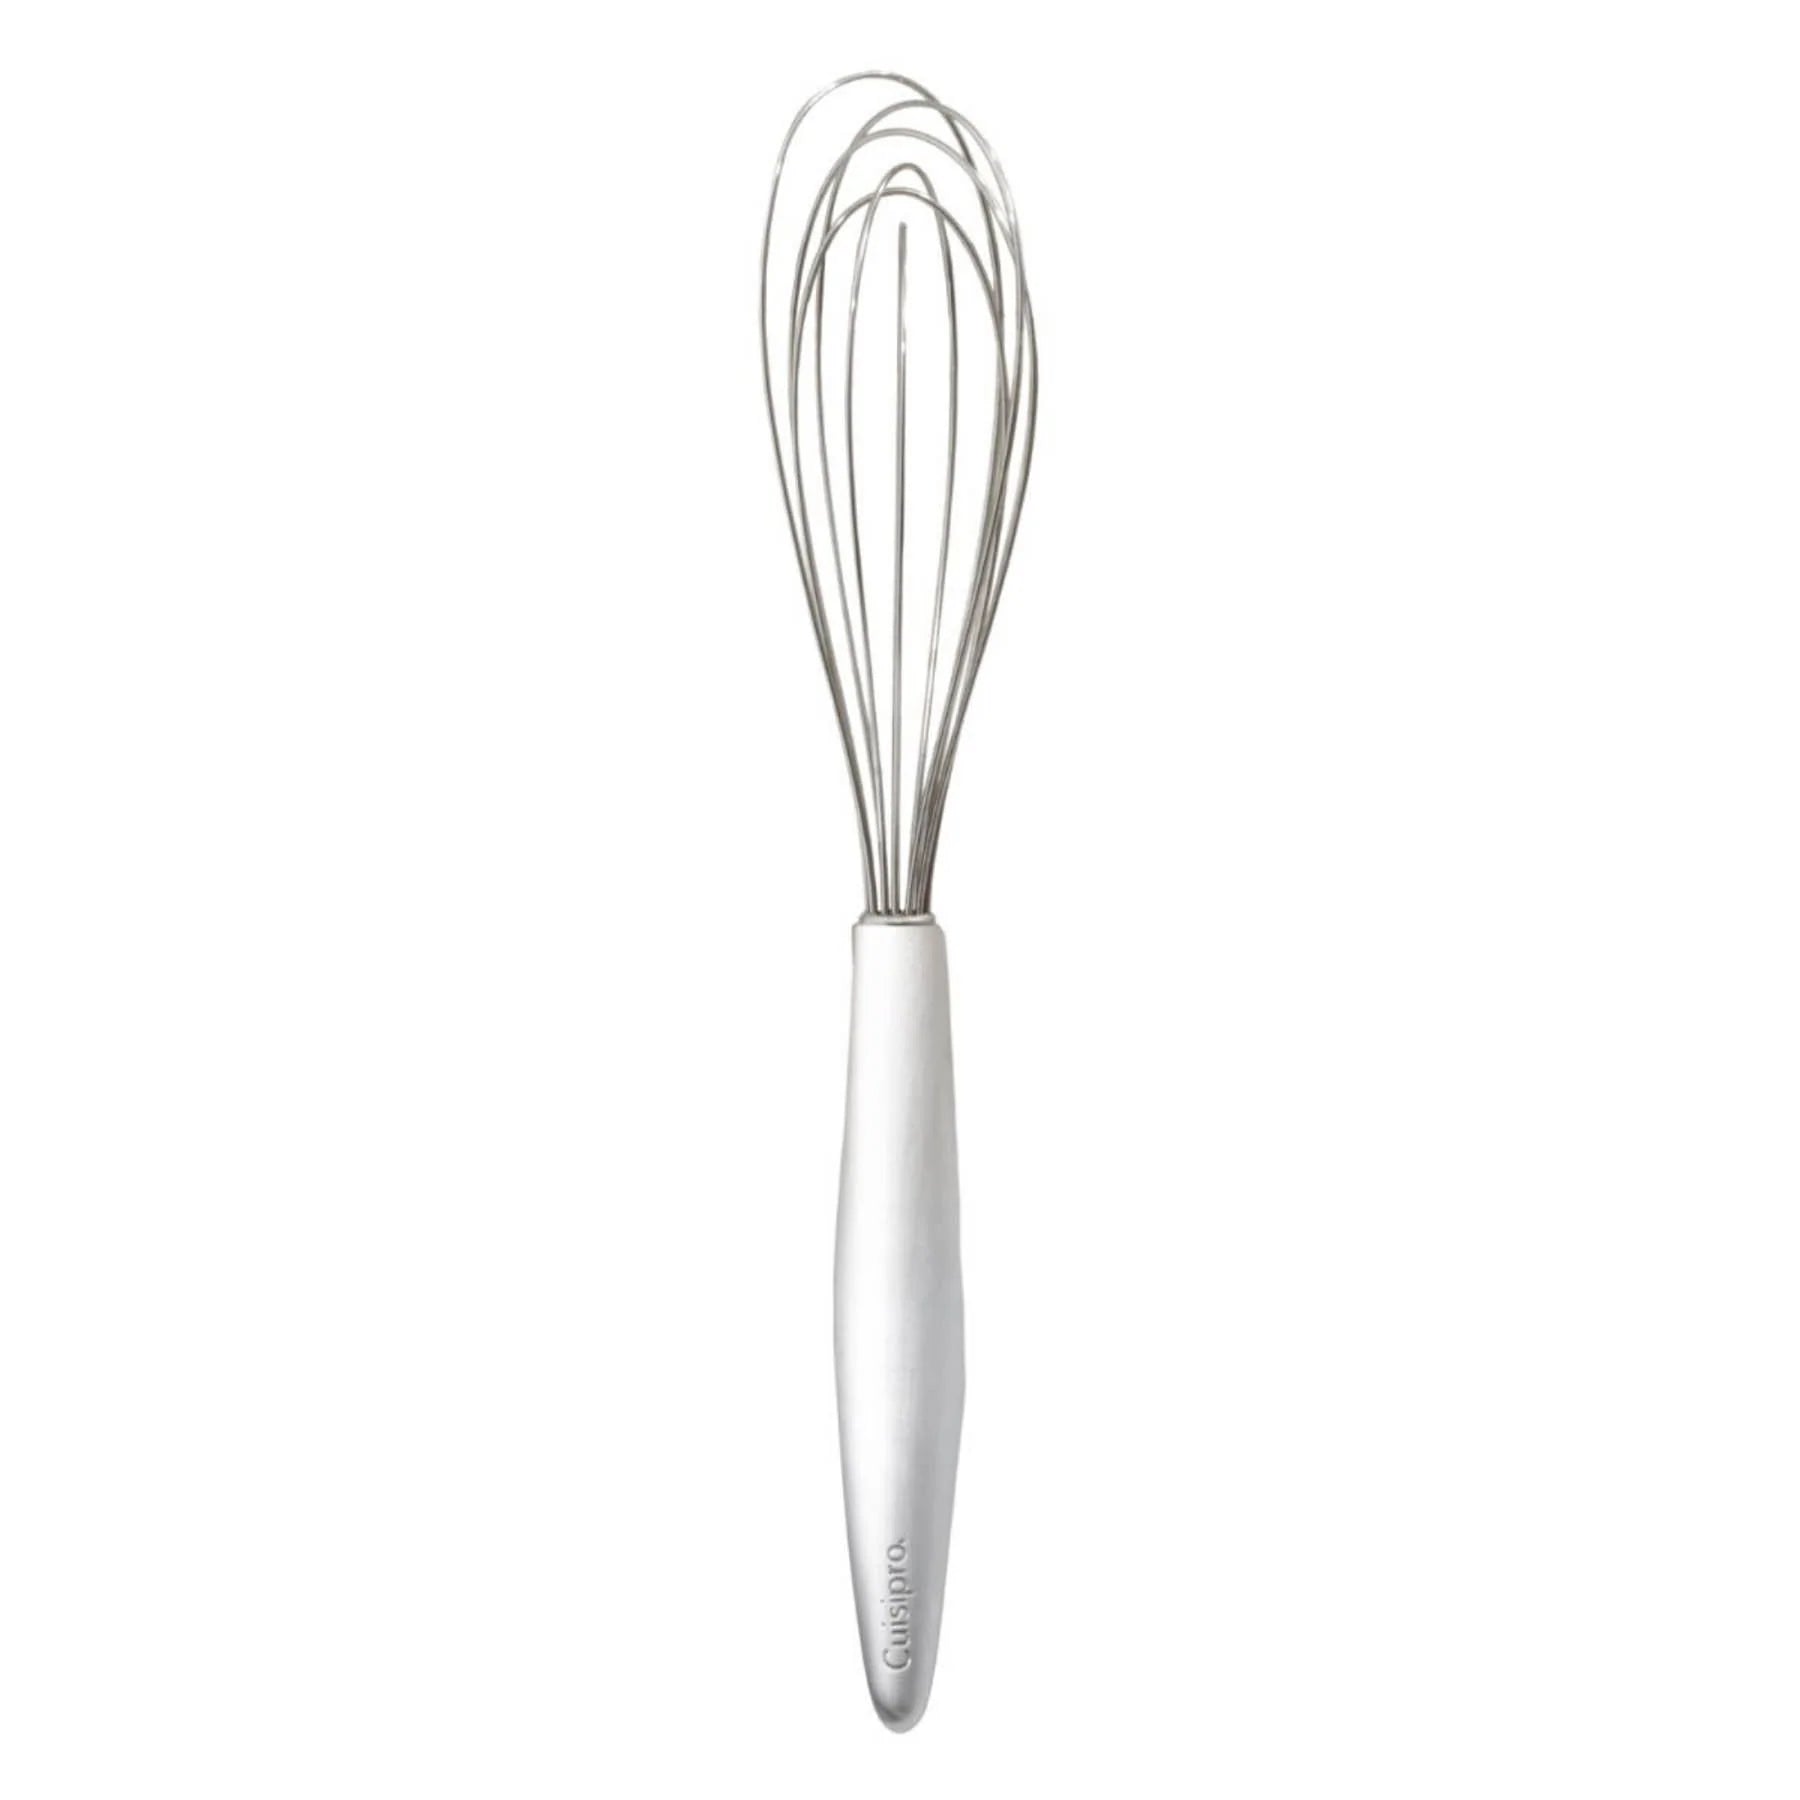 Piccolo Whisk - Cuisipro - Bluecashew Kitchen Homestead